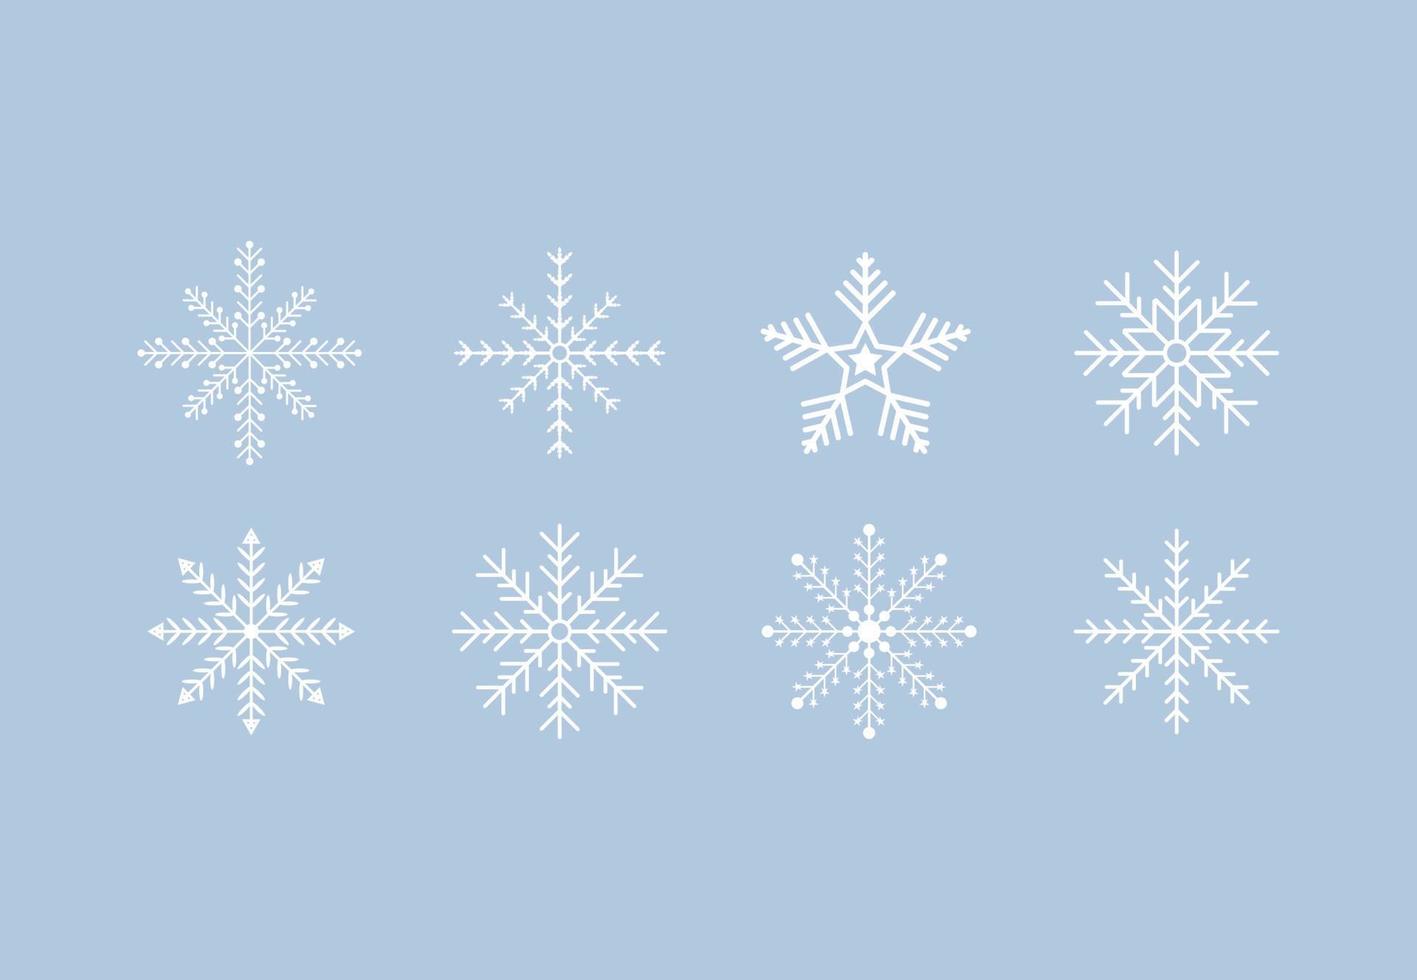 Snowflake icon or sign symbol collection. Vector illustration